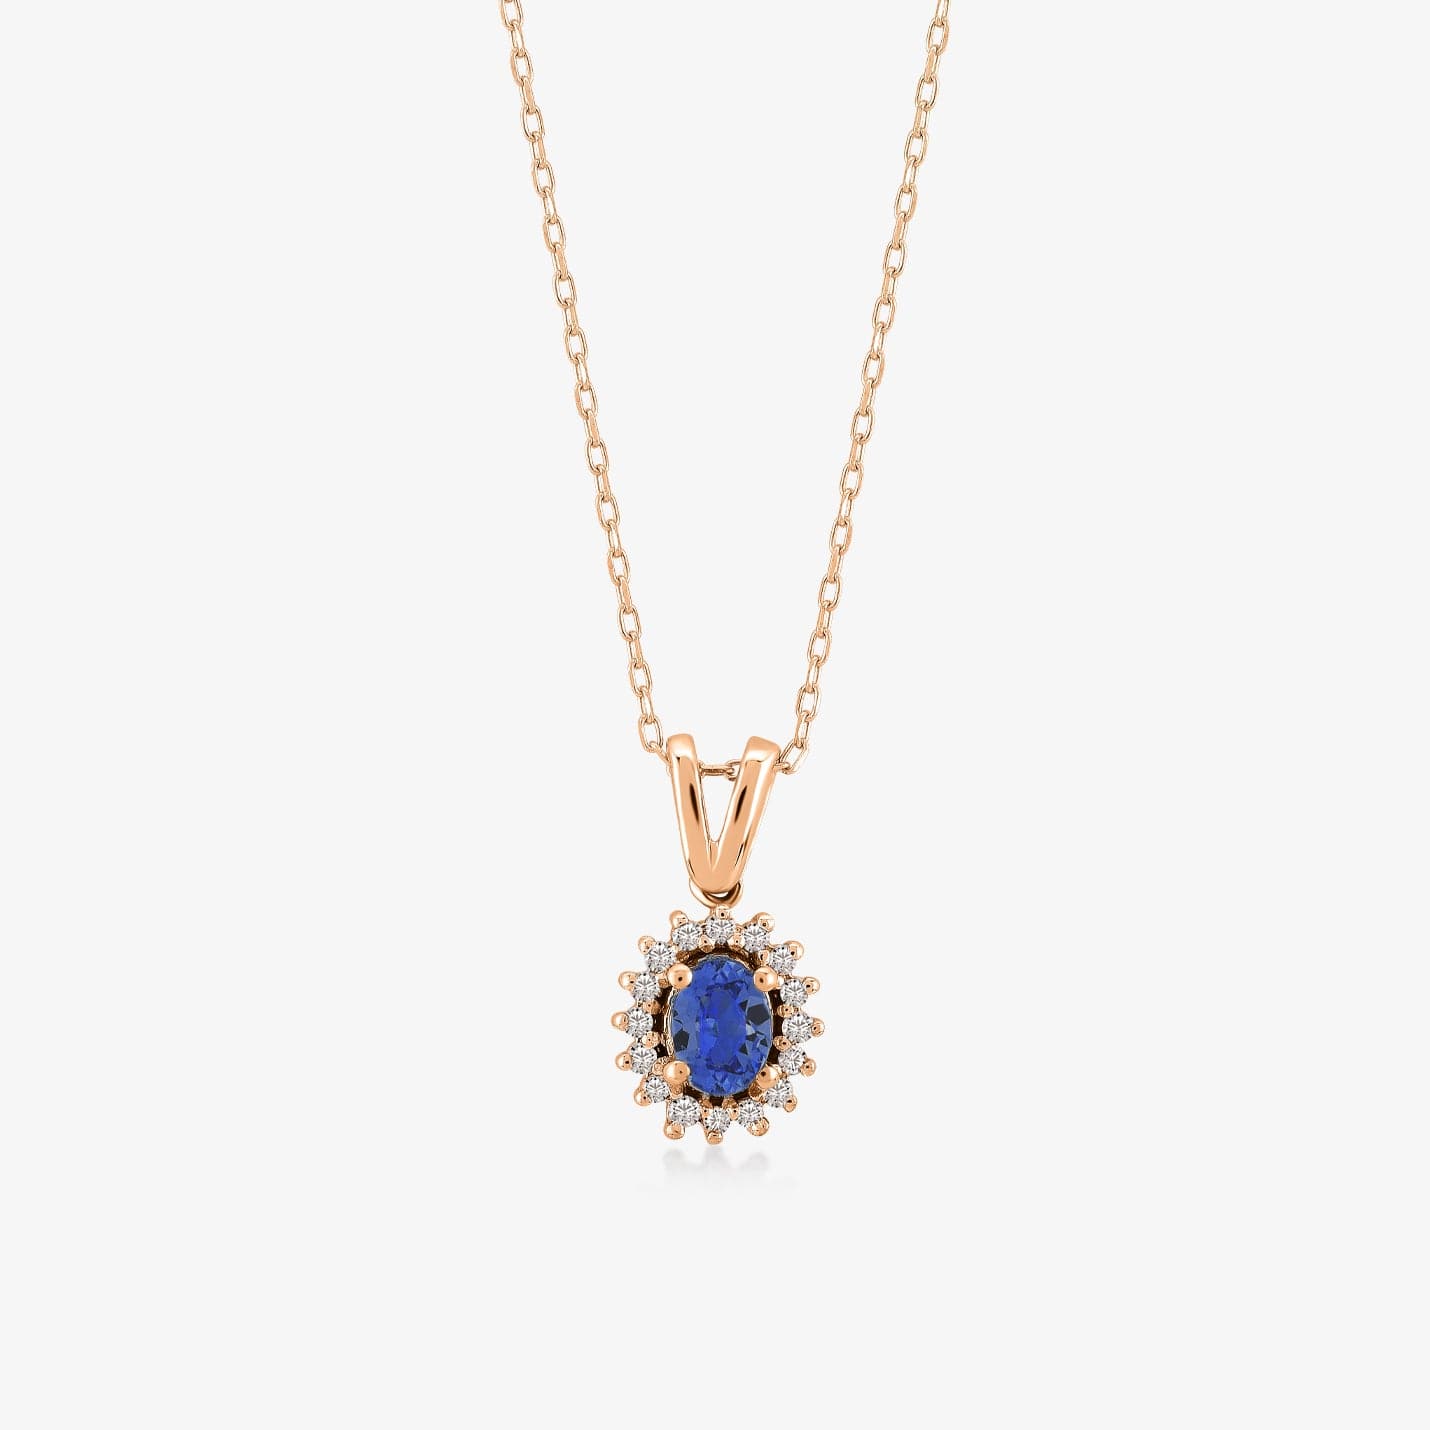 14k Solid Gold and Diamond Sapphire Necklace | Blue Gemstone